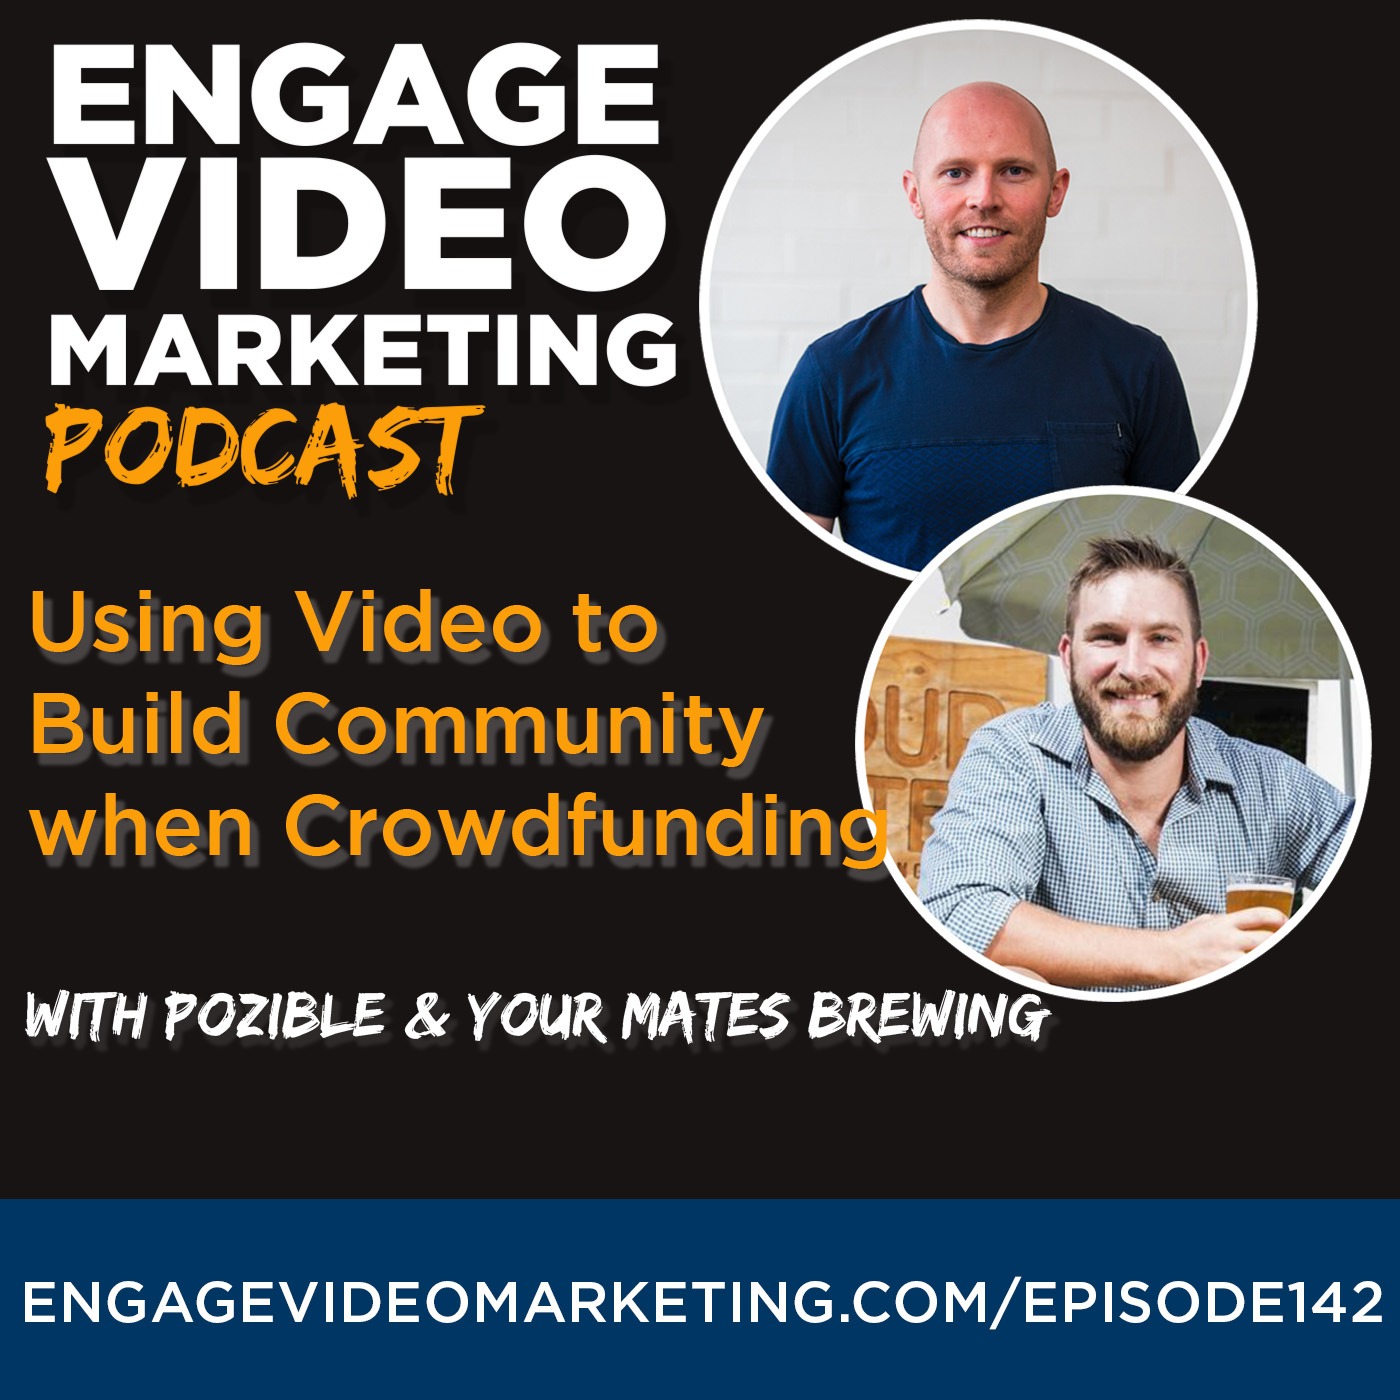 Using Video to Build Community when Crowdfunding with Pozible & Your Mates Brewing